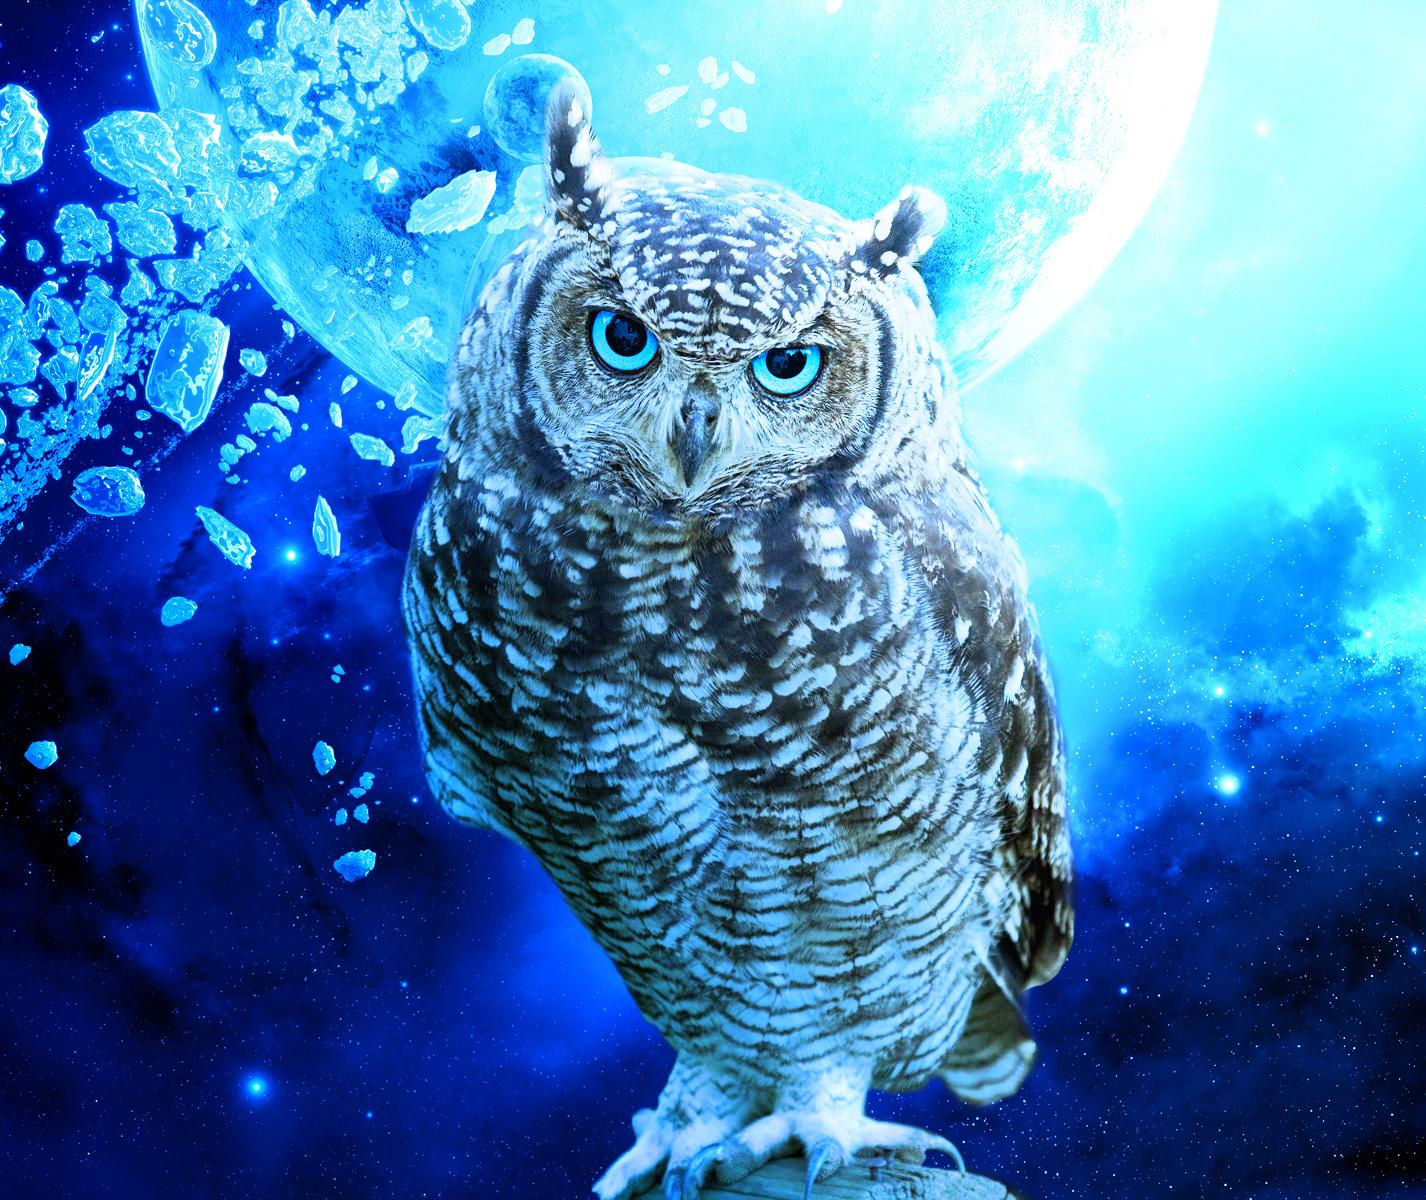 Owl Wallpapers